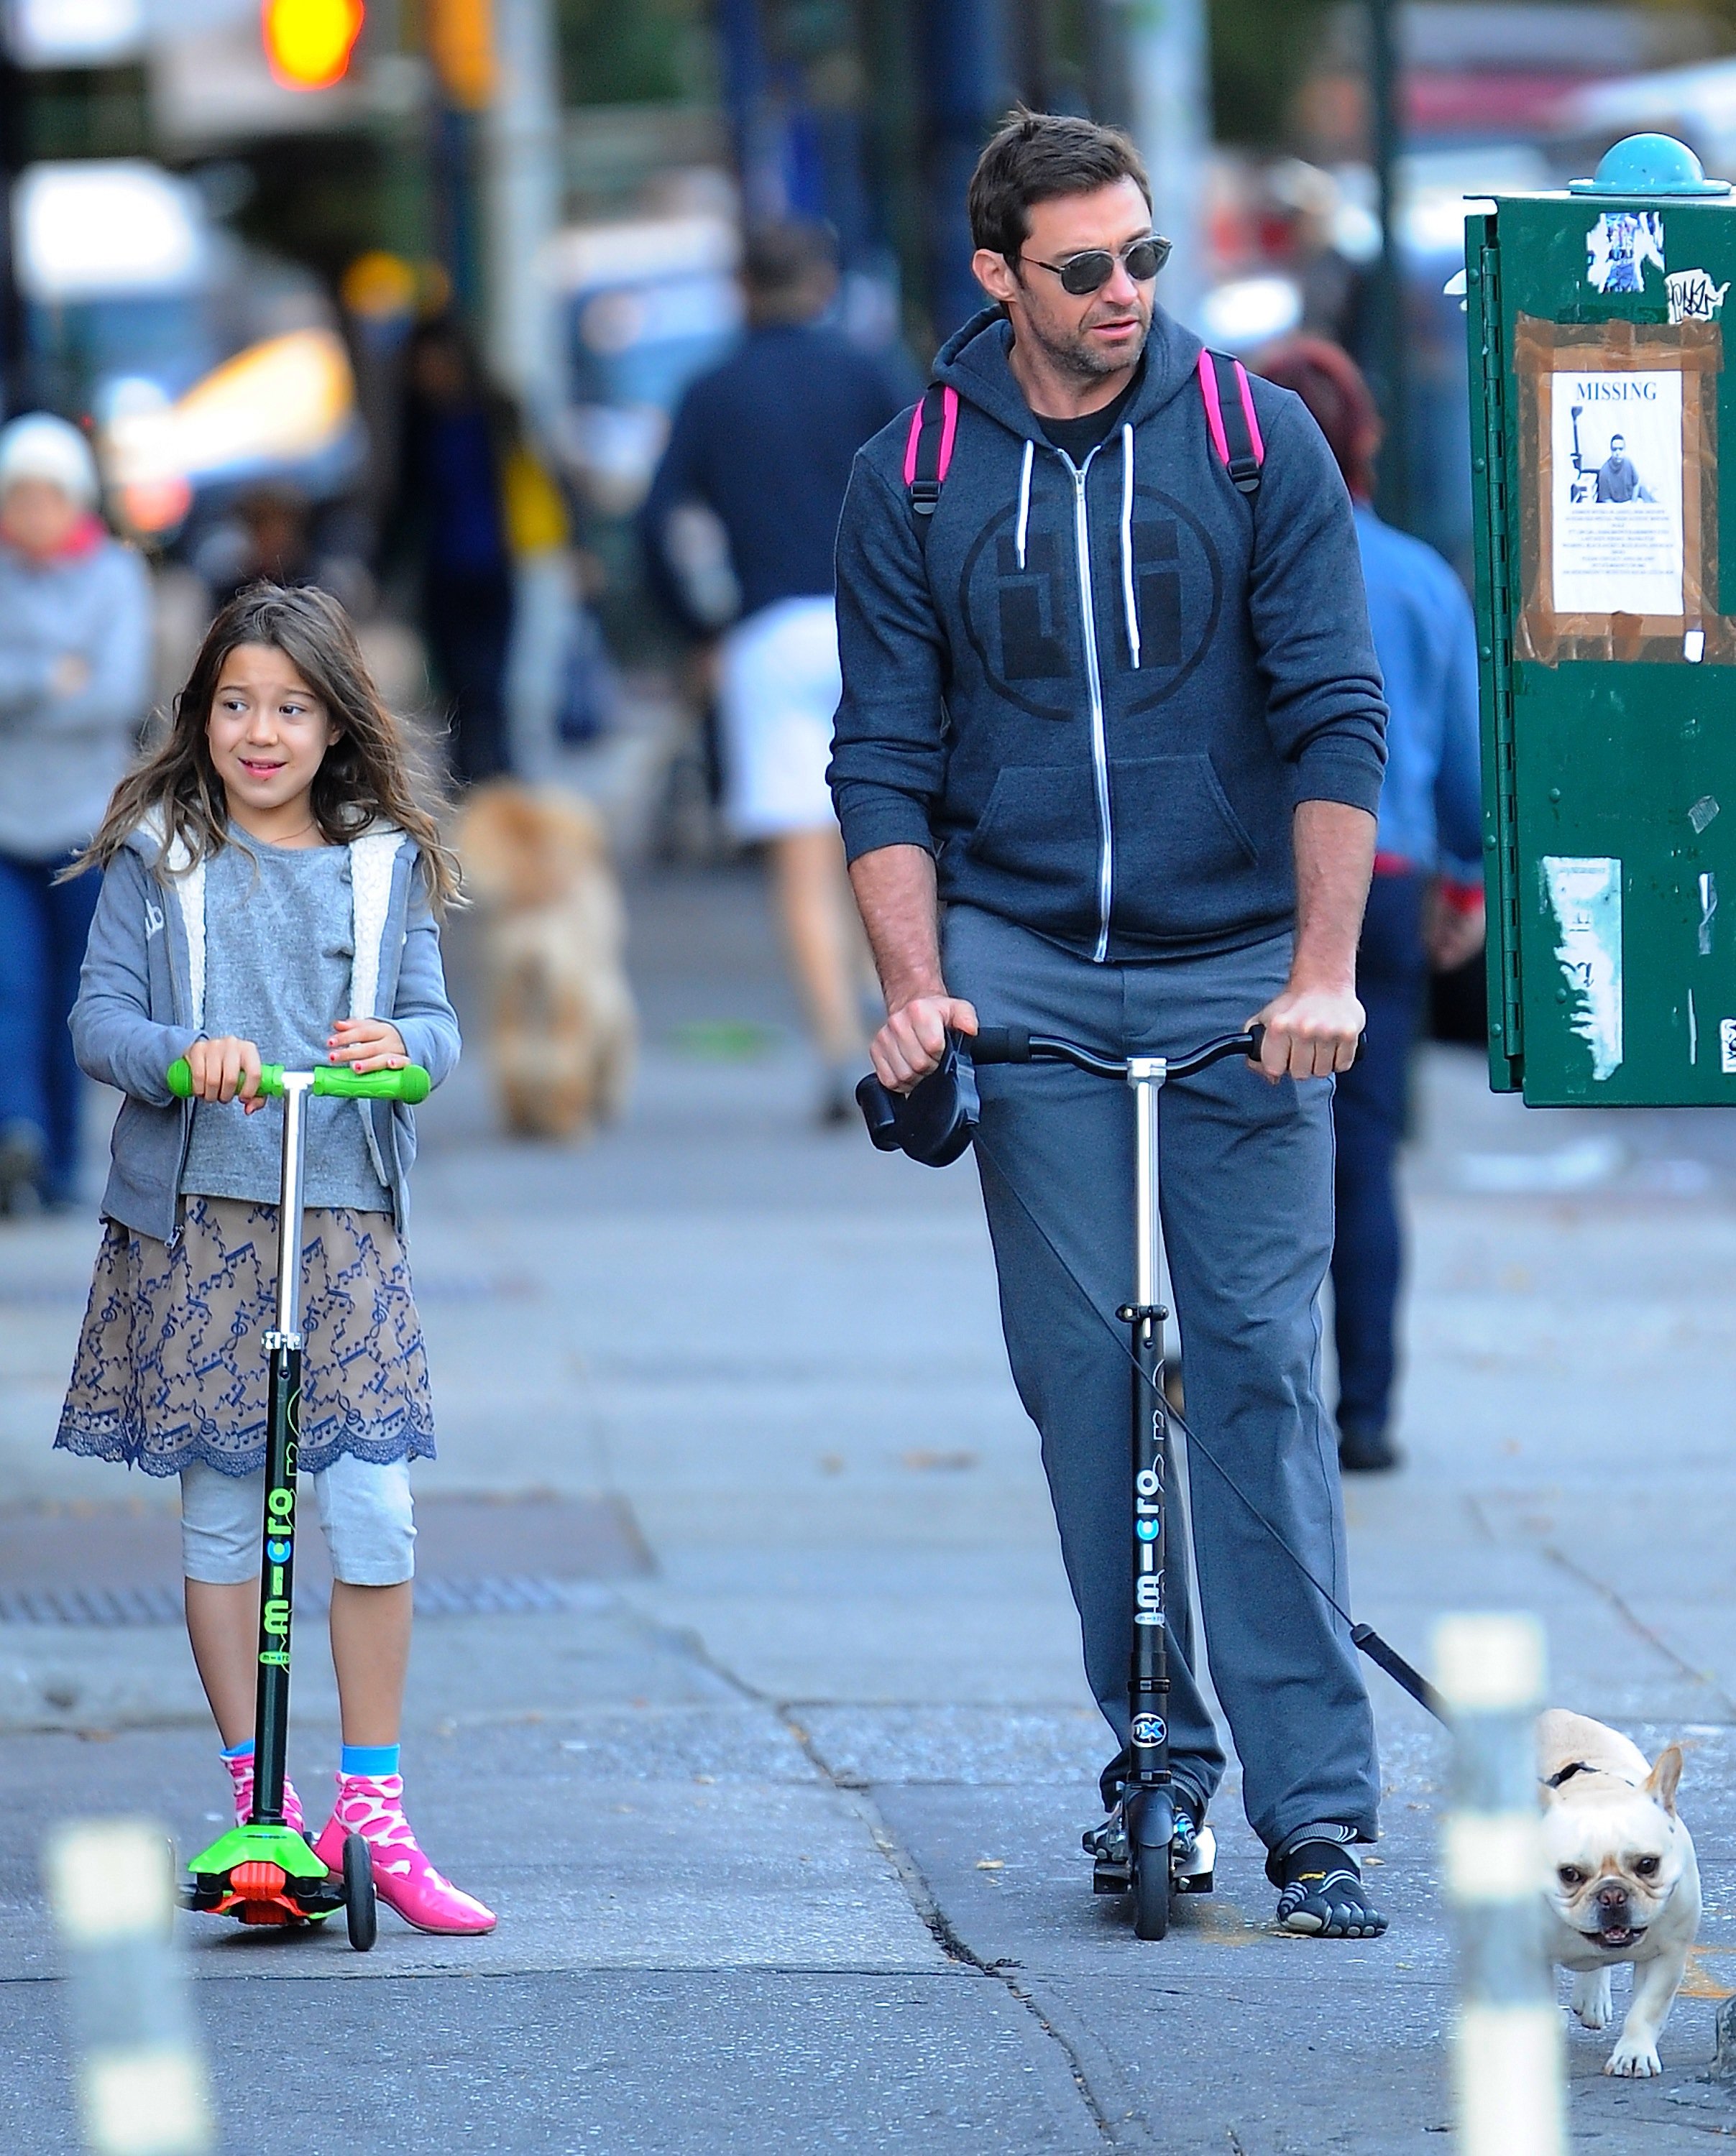 Ava Eliot Jackman and Hugh Jackman riding their scooters in New York on October 18, 2013 | Source: Getty Images